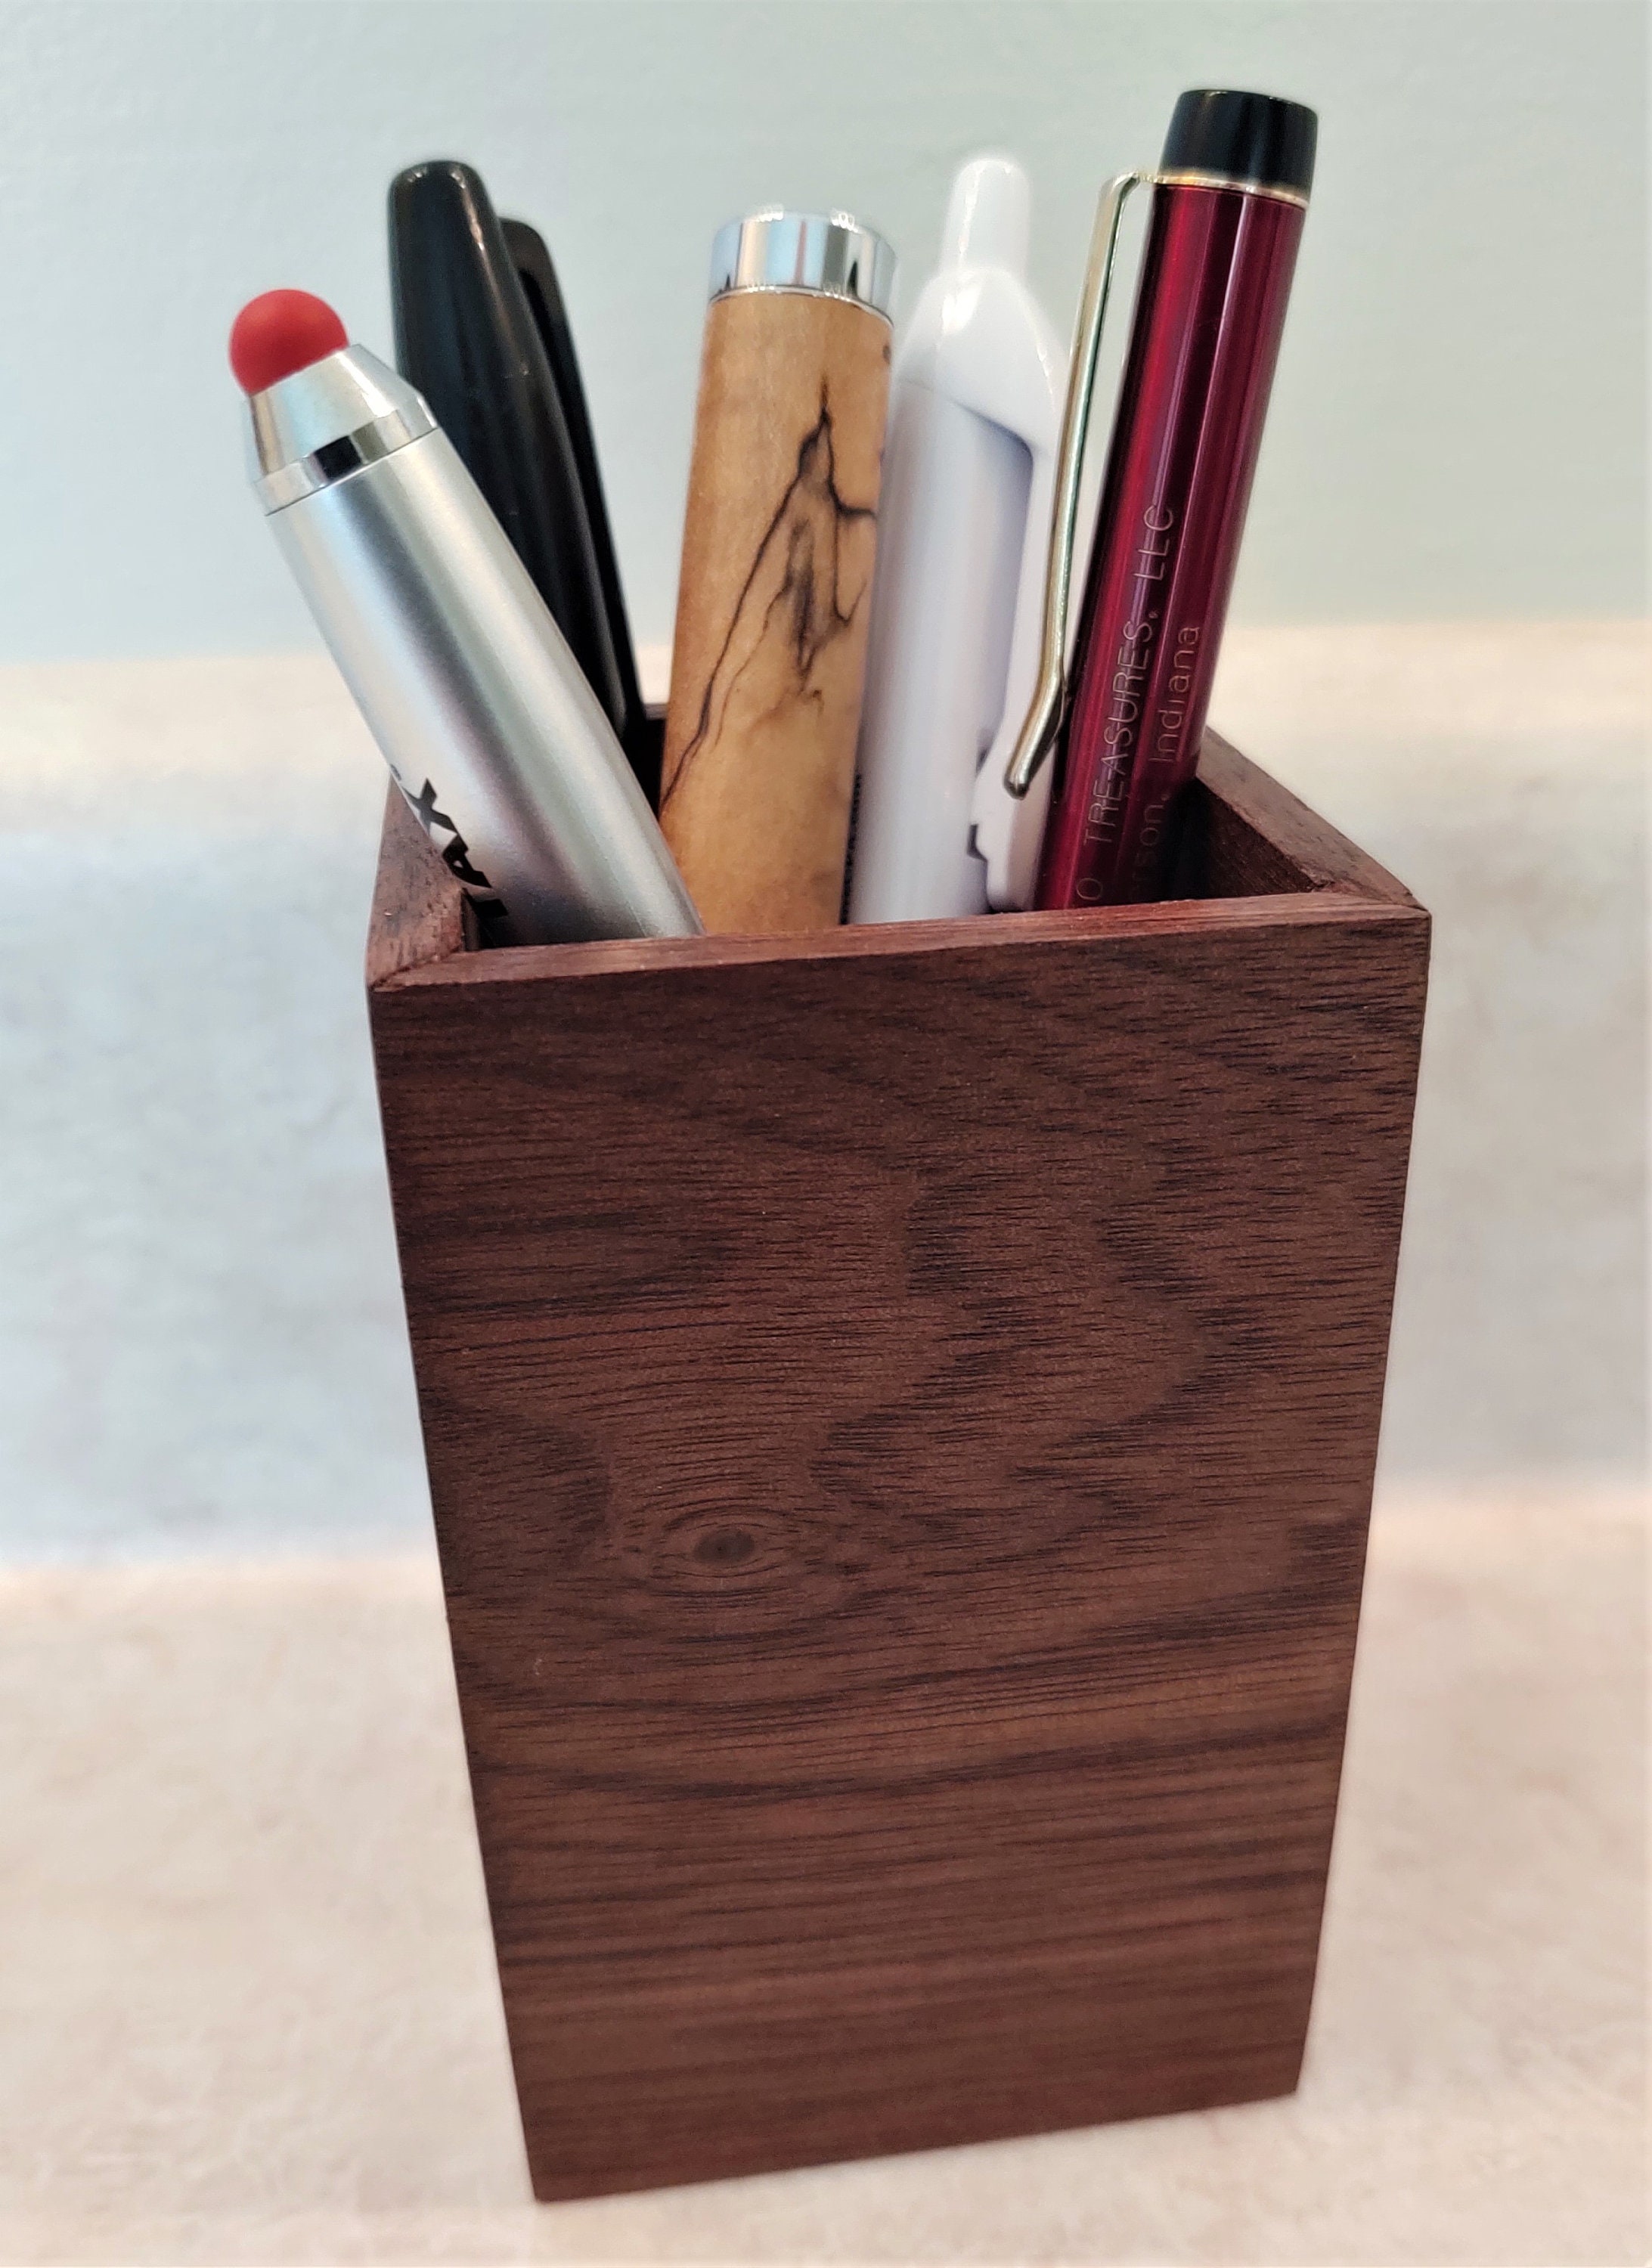 Christmas Sale 25% off Limited Time Pen and Pencil Caddy With Business Card  Holder, Desk Organizer, Walnut, Wood 